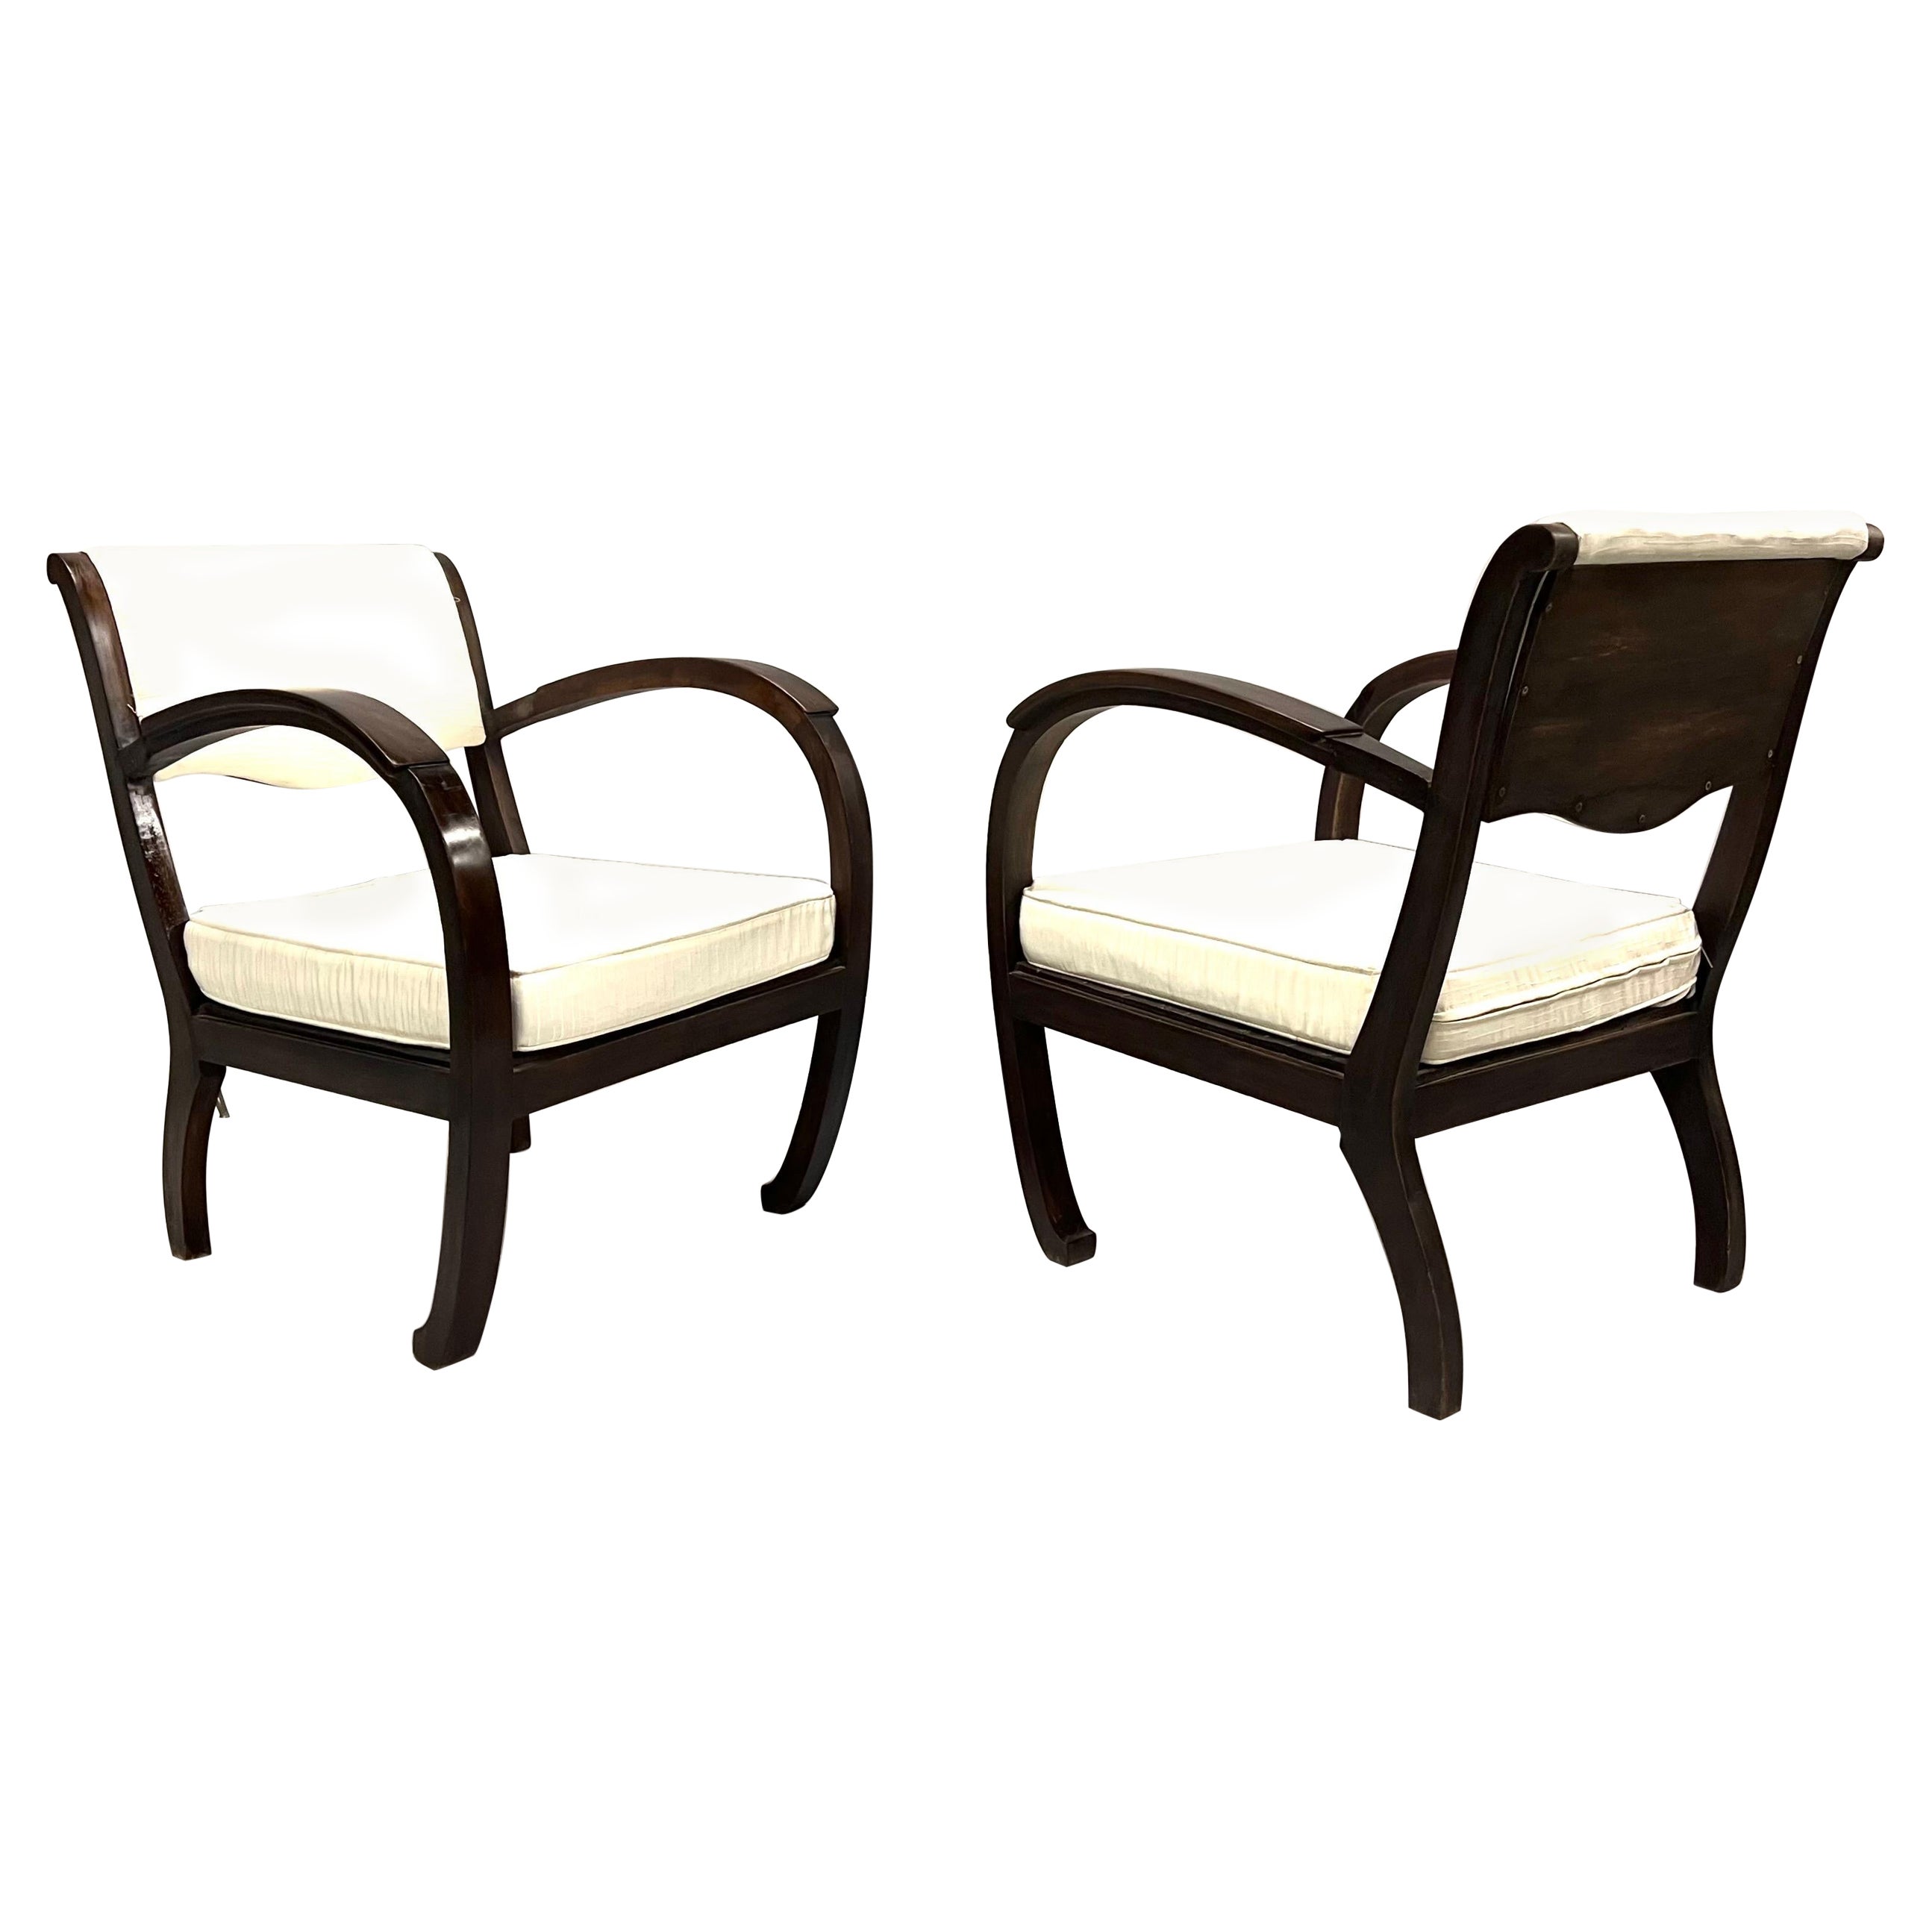 Rare French Art Deco Hand Carved Teak Armchairs/ Lounge Chairs, 1920-30 For Sale